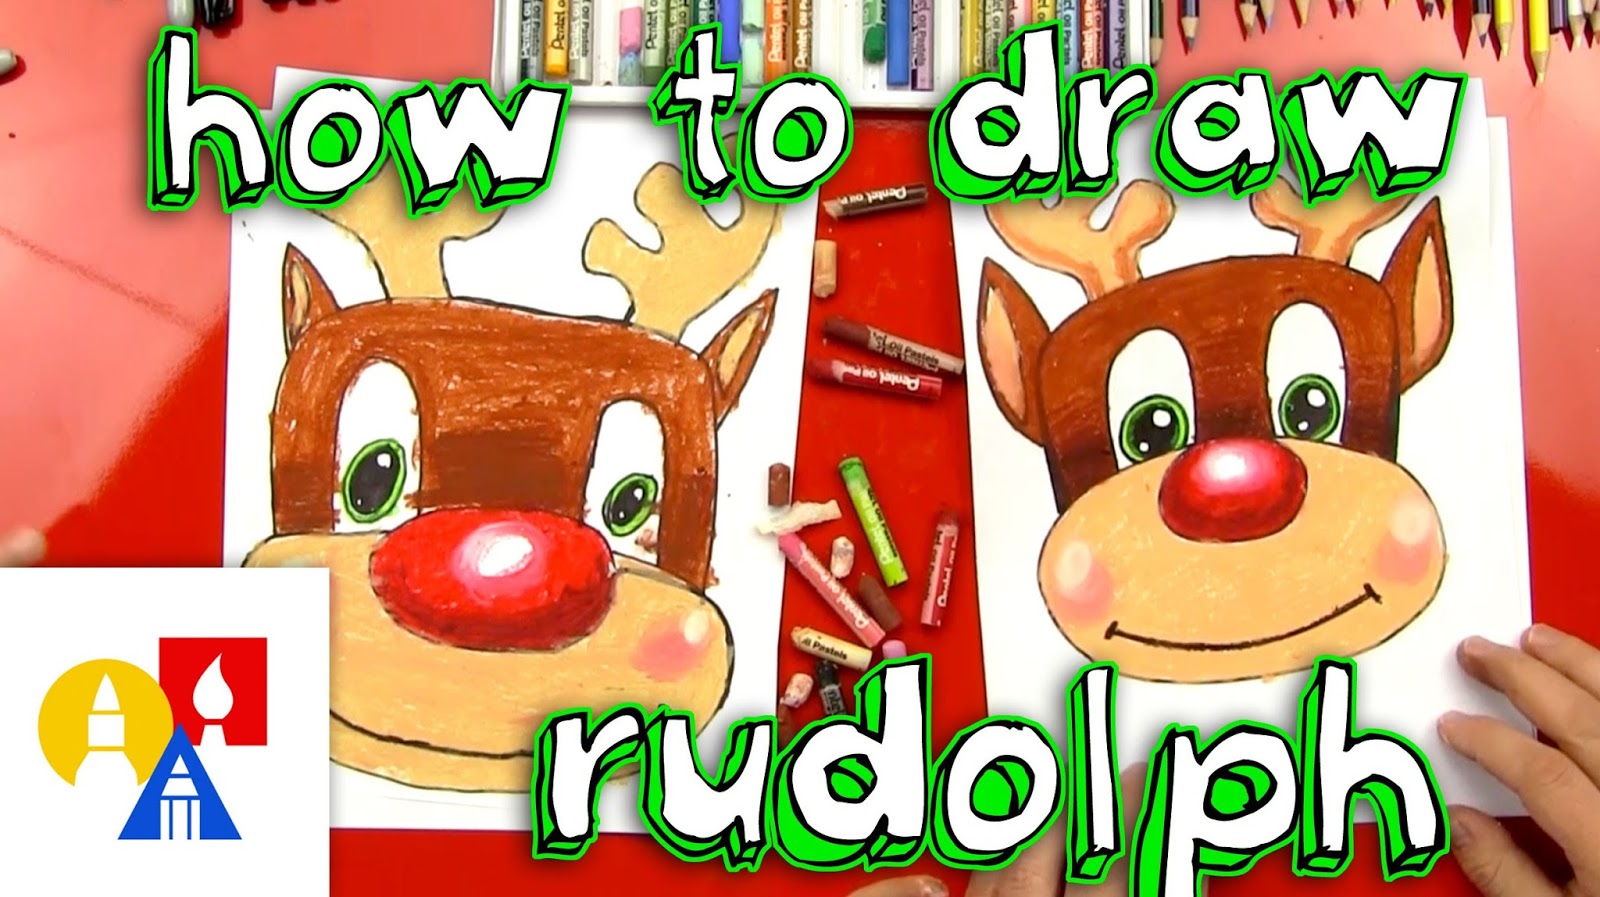 English is FUNtastic: How To Draw Rudolph - simple video tutorial